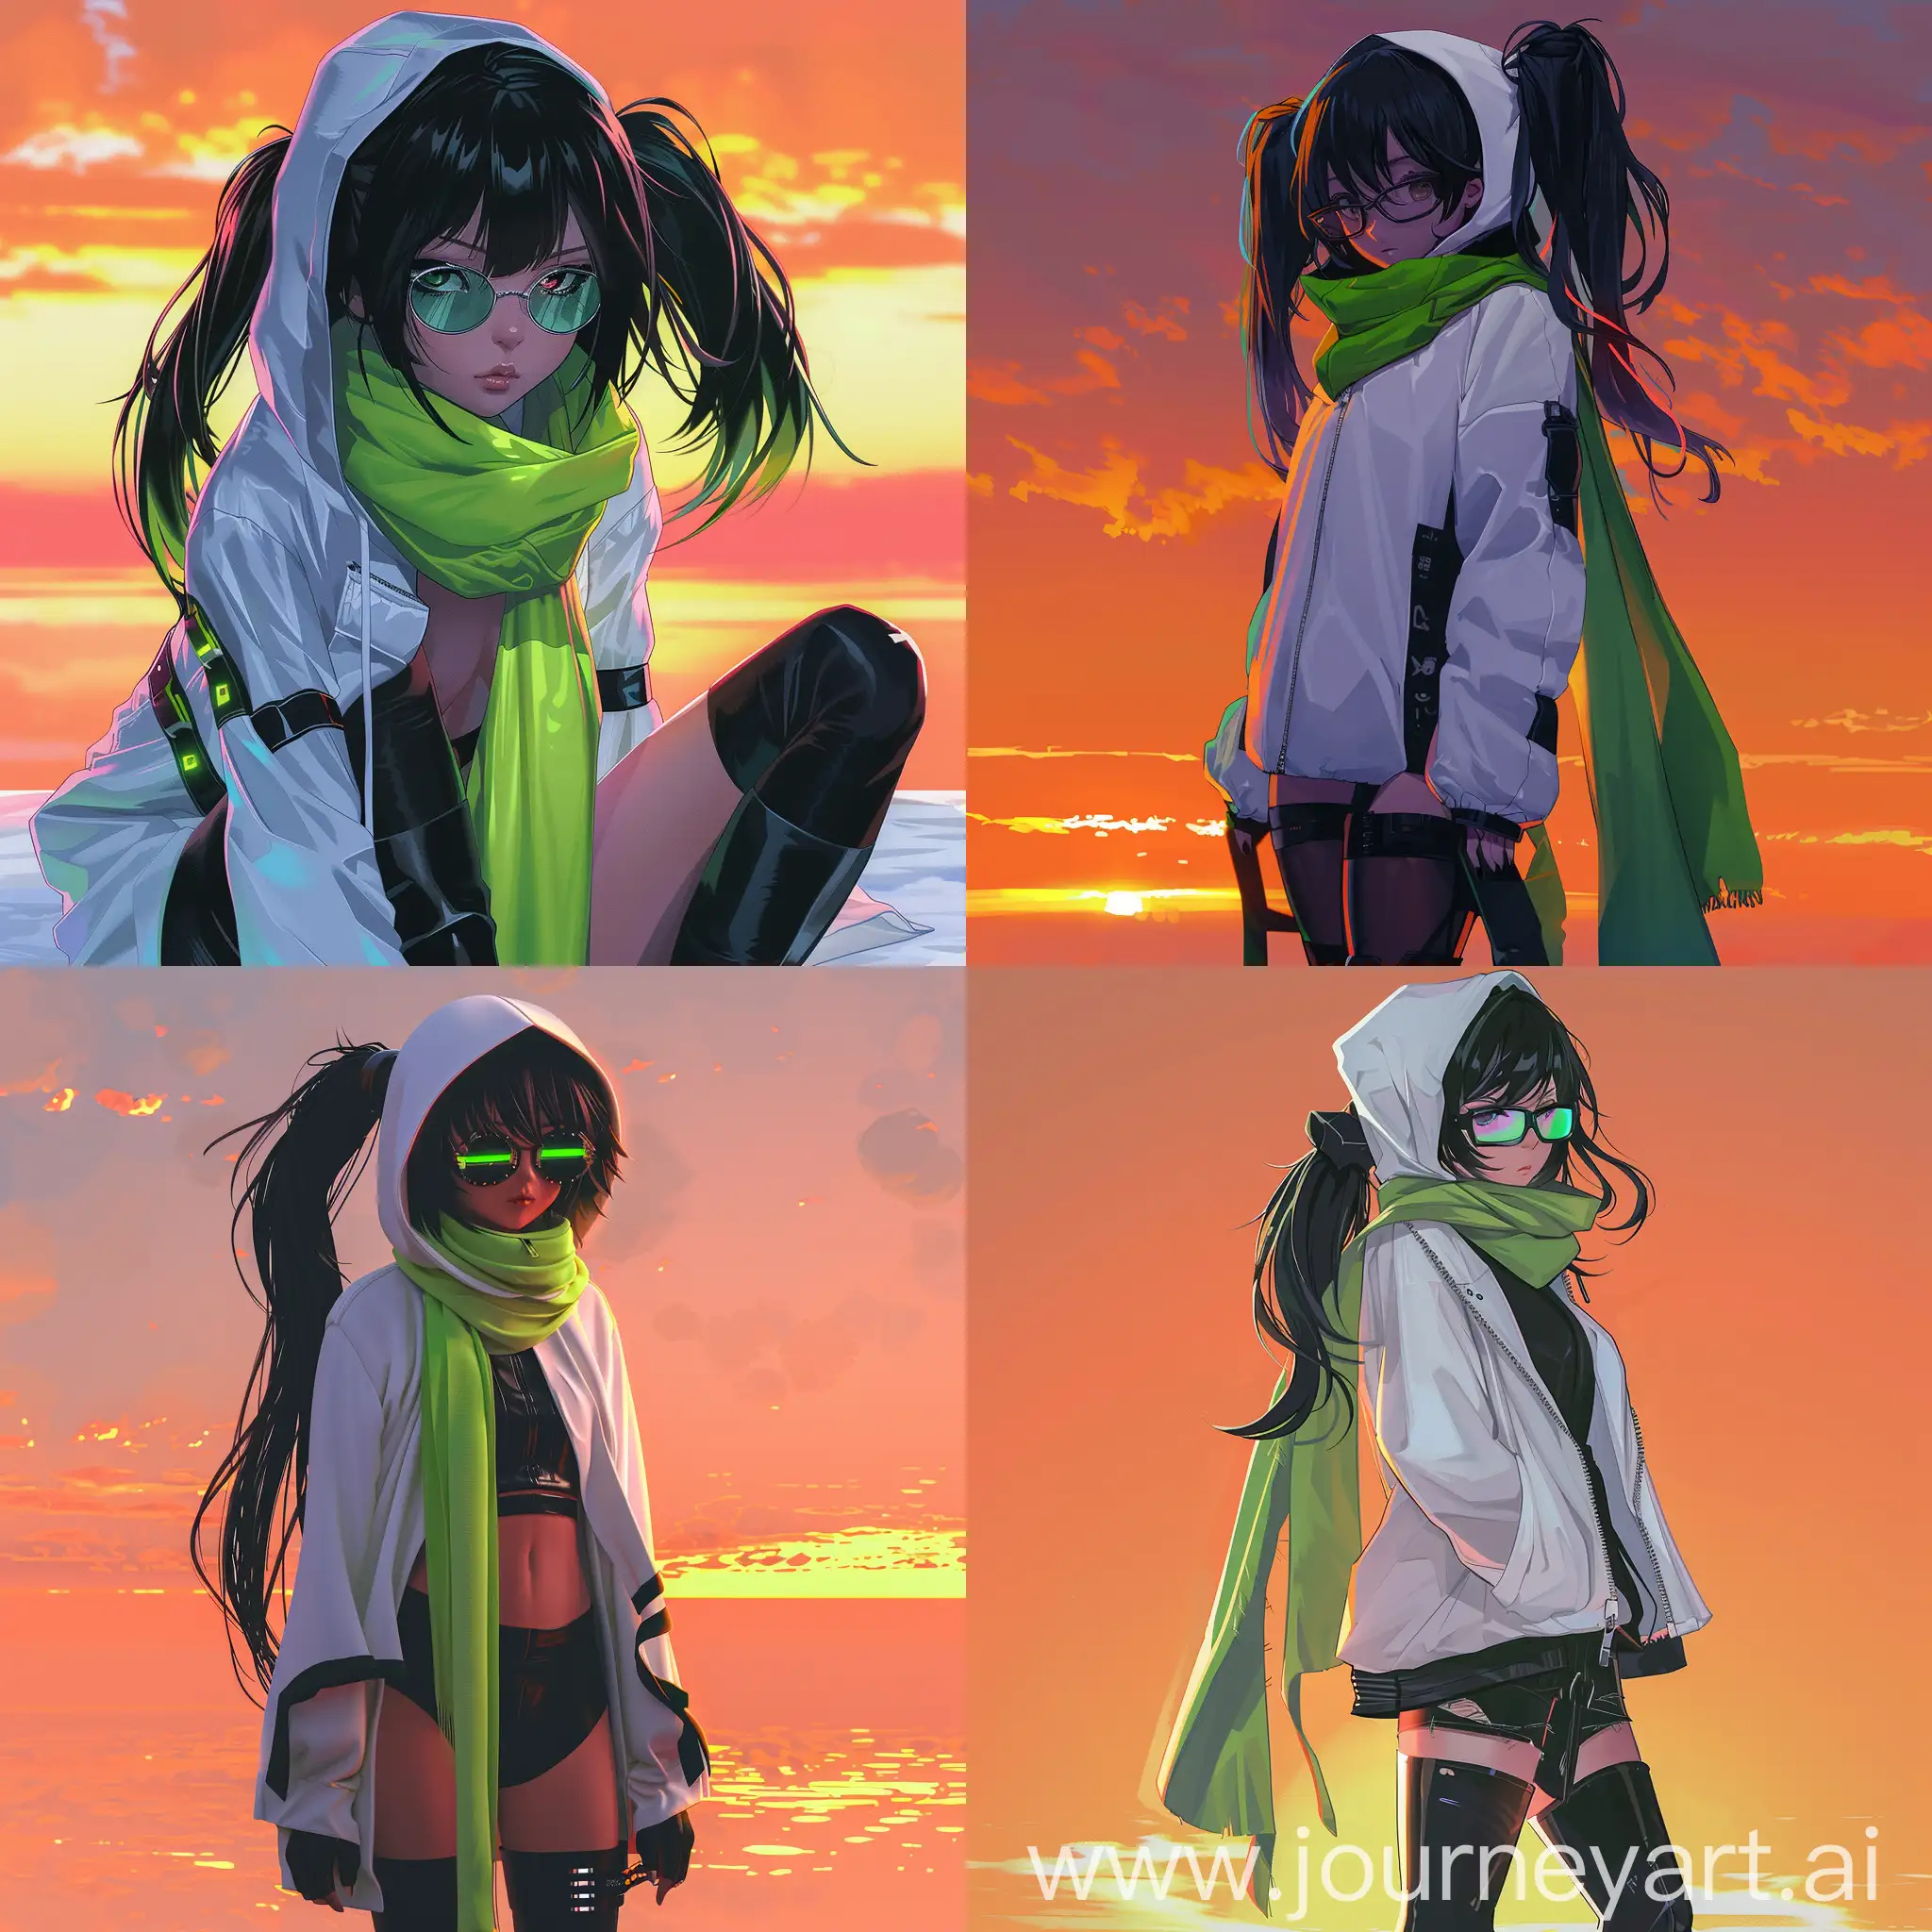 Anime-Girl-in-Neon-Sunset-Detailed-Portrait-with-Fashionable-Outfit